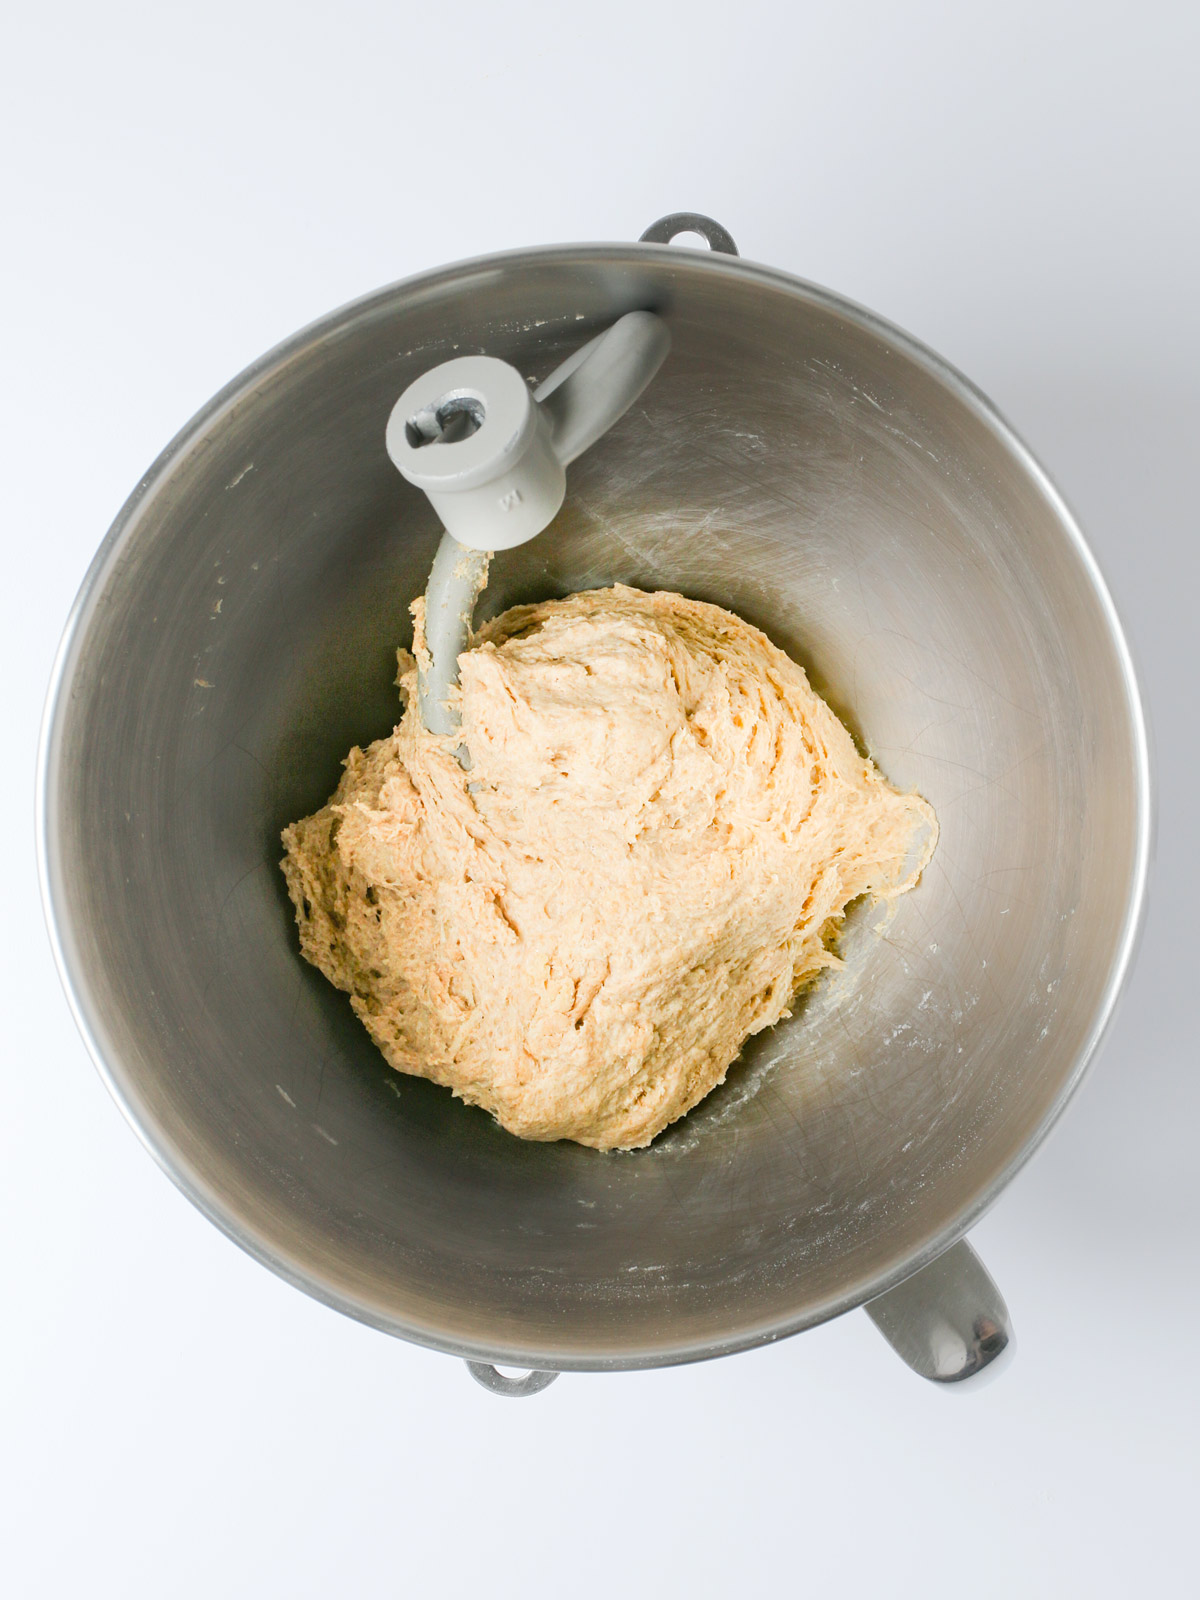 dough ball formed with dough hook in mixer bowl.